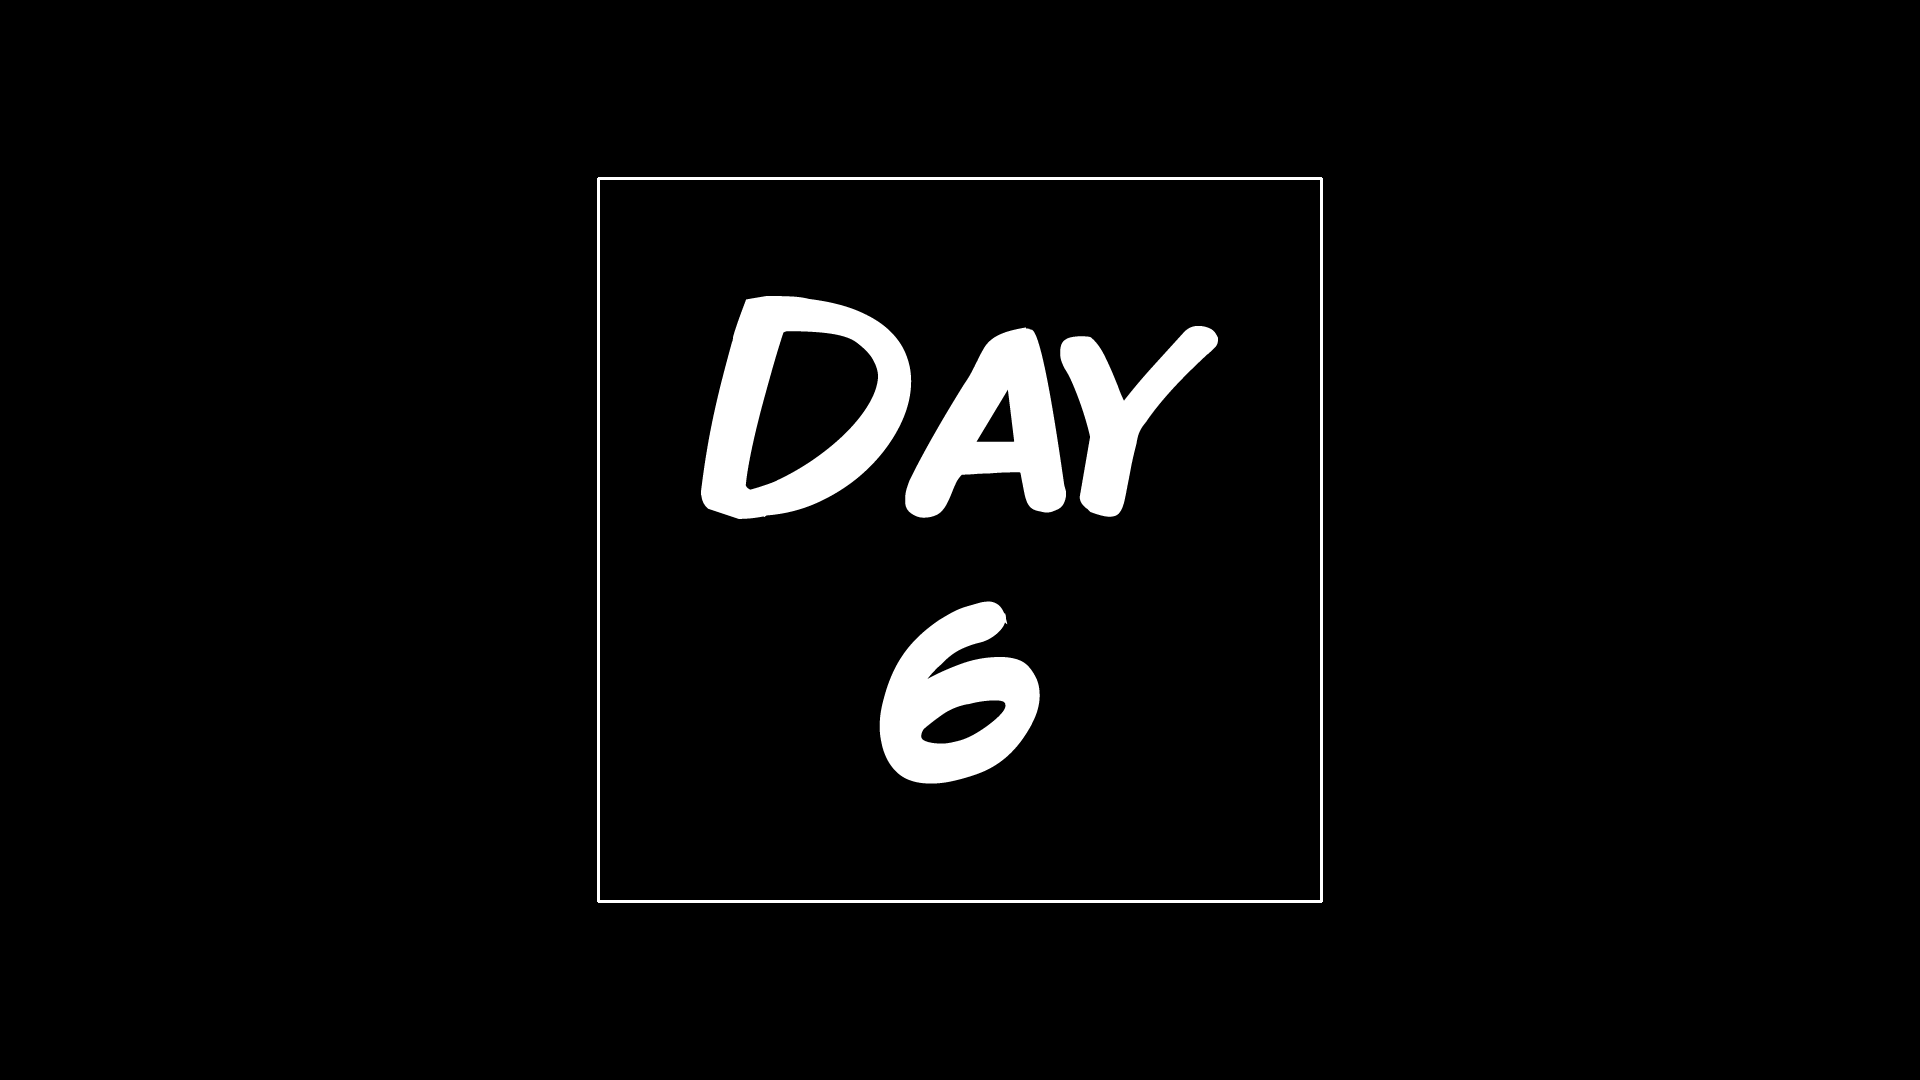 Icon for Day 6